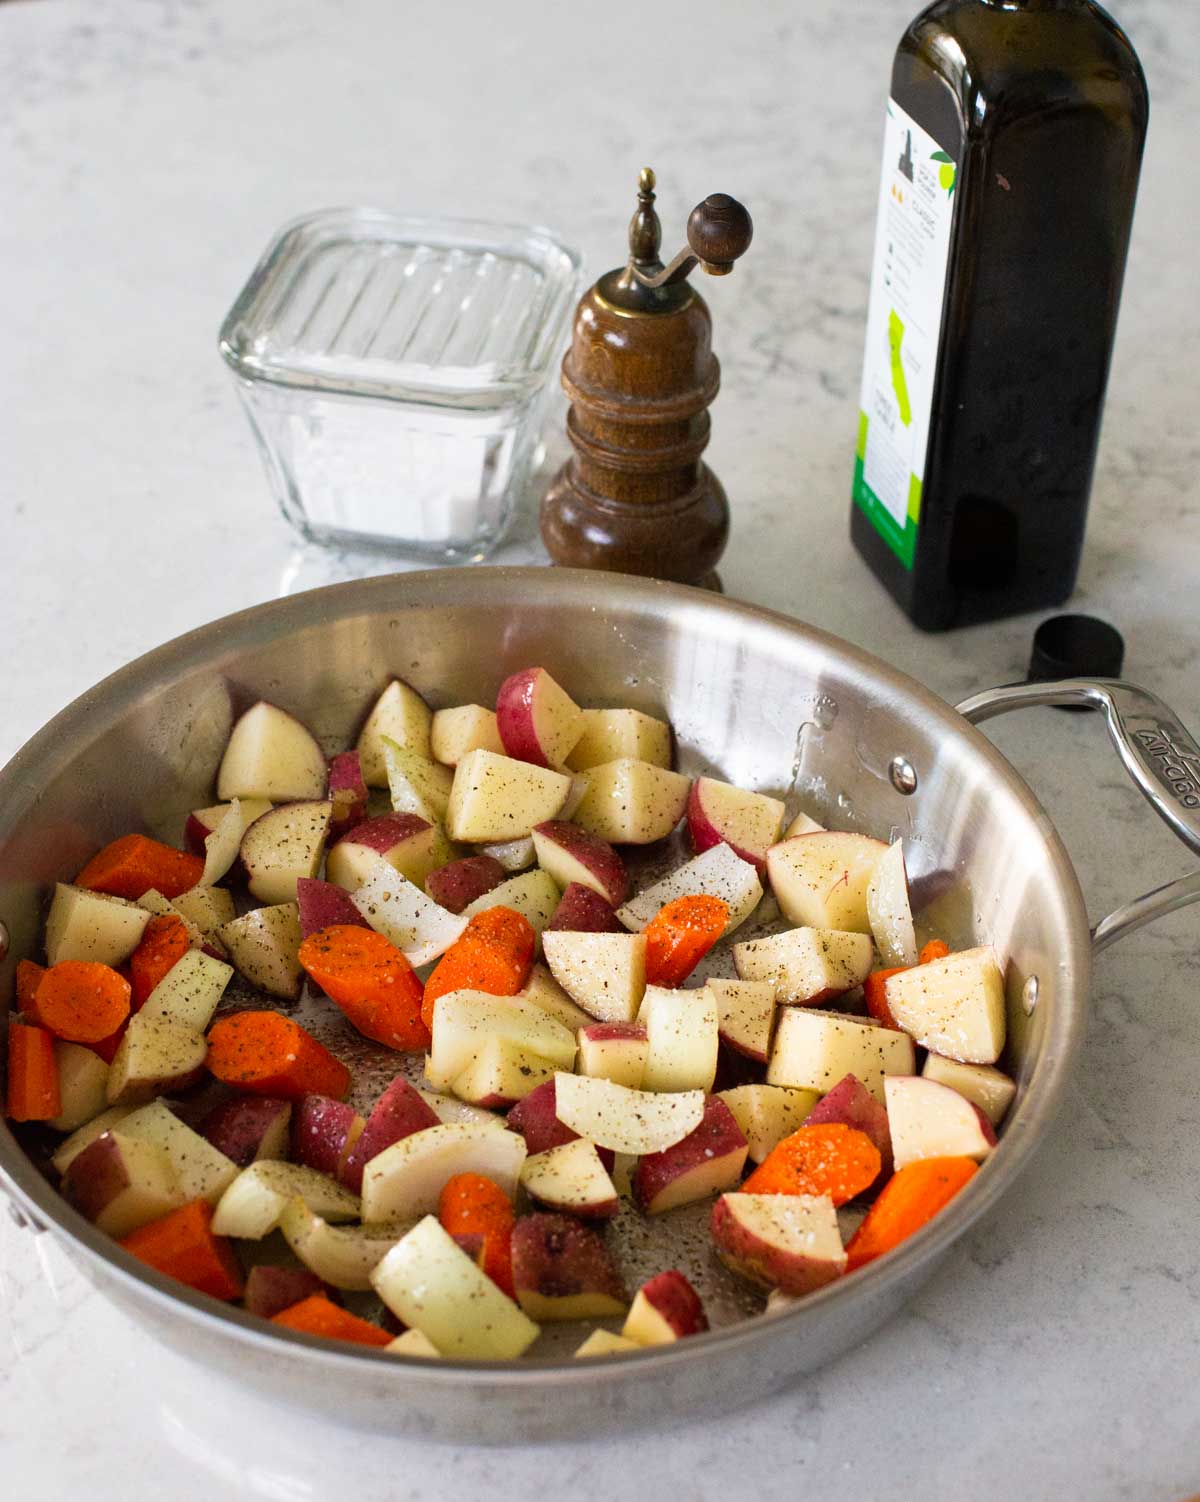 The potatoes, carrots, and onions have been chopped and tossed with olive oil in a large round roasting pan.